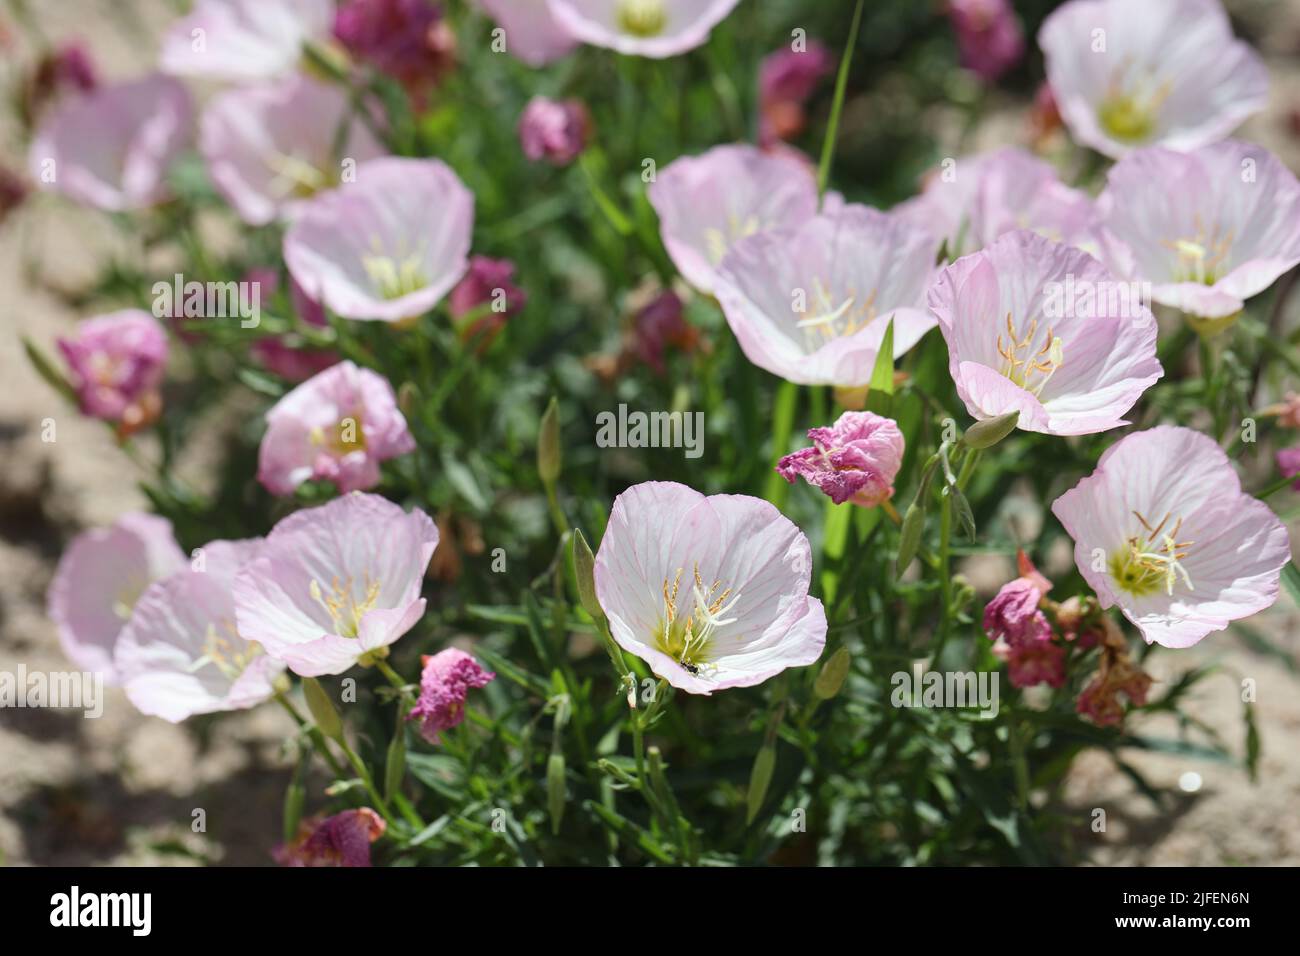 many flowers of a pink evening primrose in the sun Stock Photo